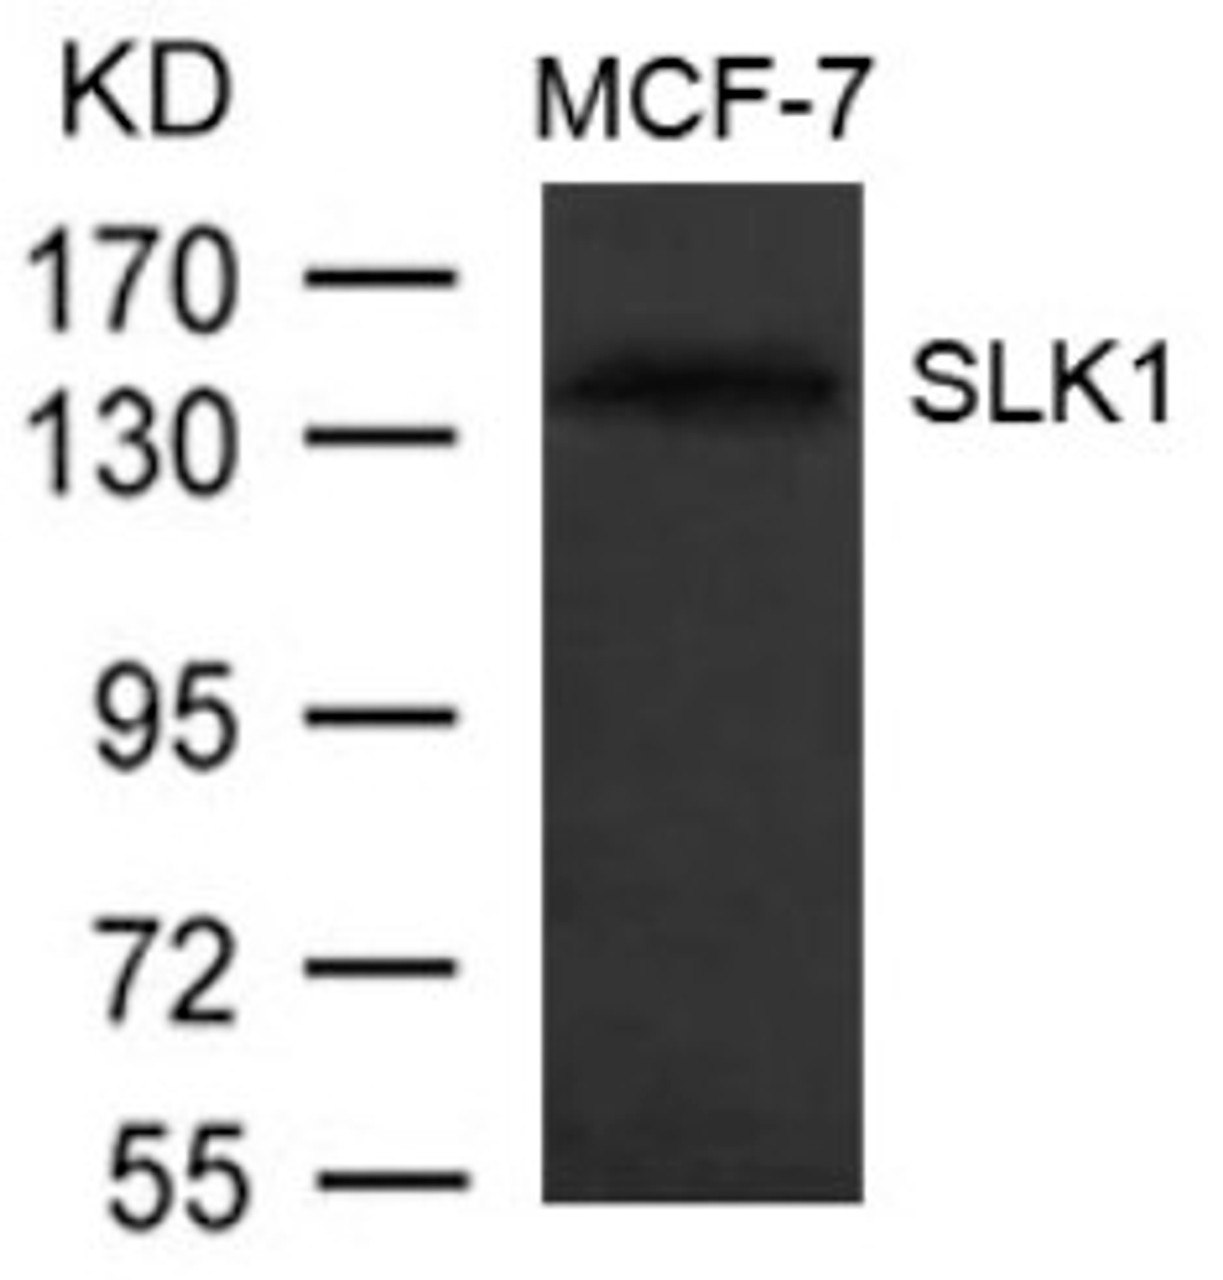 Western blot analysis of extract from MCF-7 cells using SLK1 Antibody.